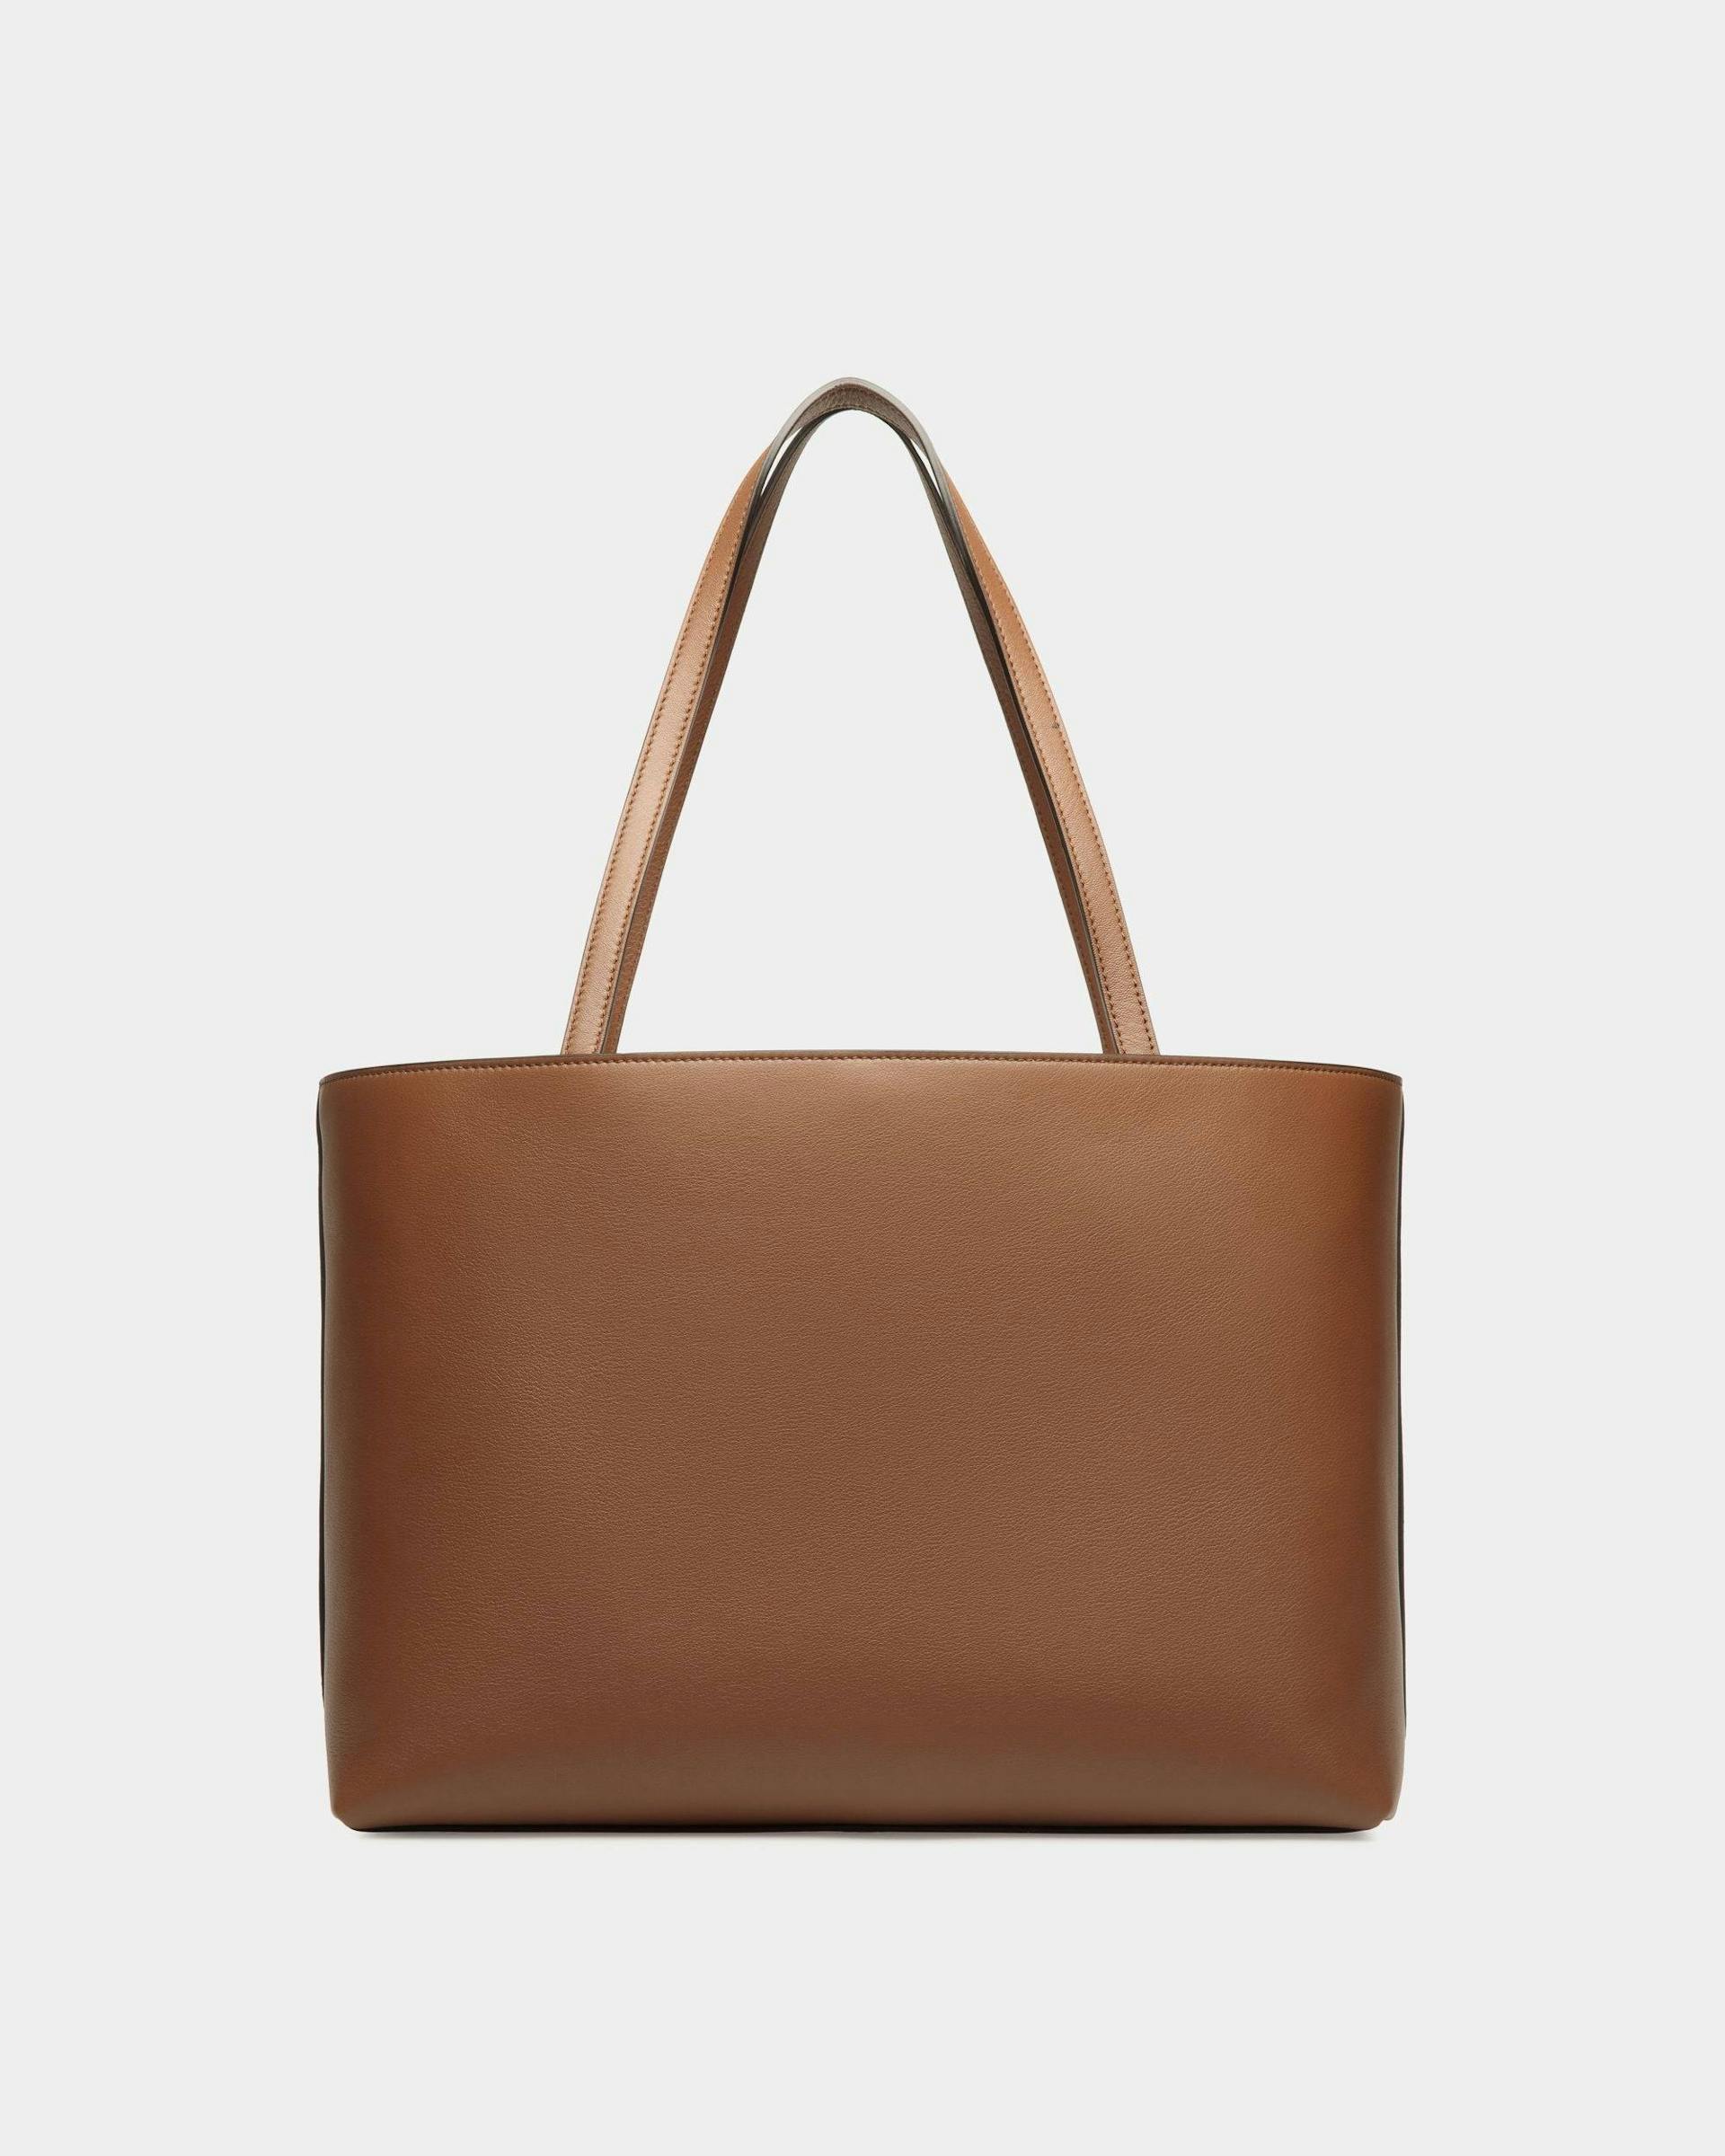 Bally Spell Tote Bag in Brown Leather - Women's - Bally - 02